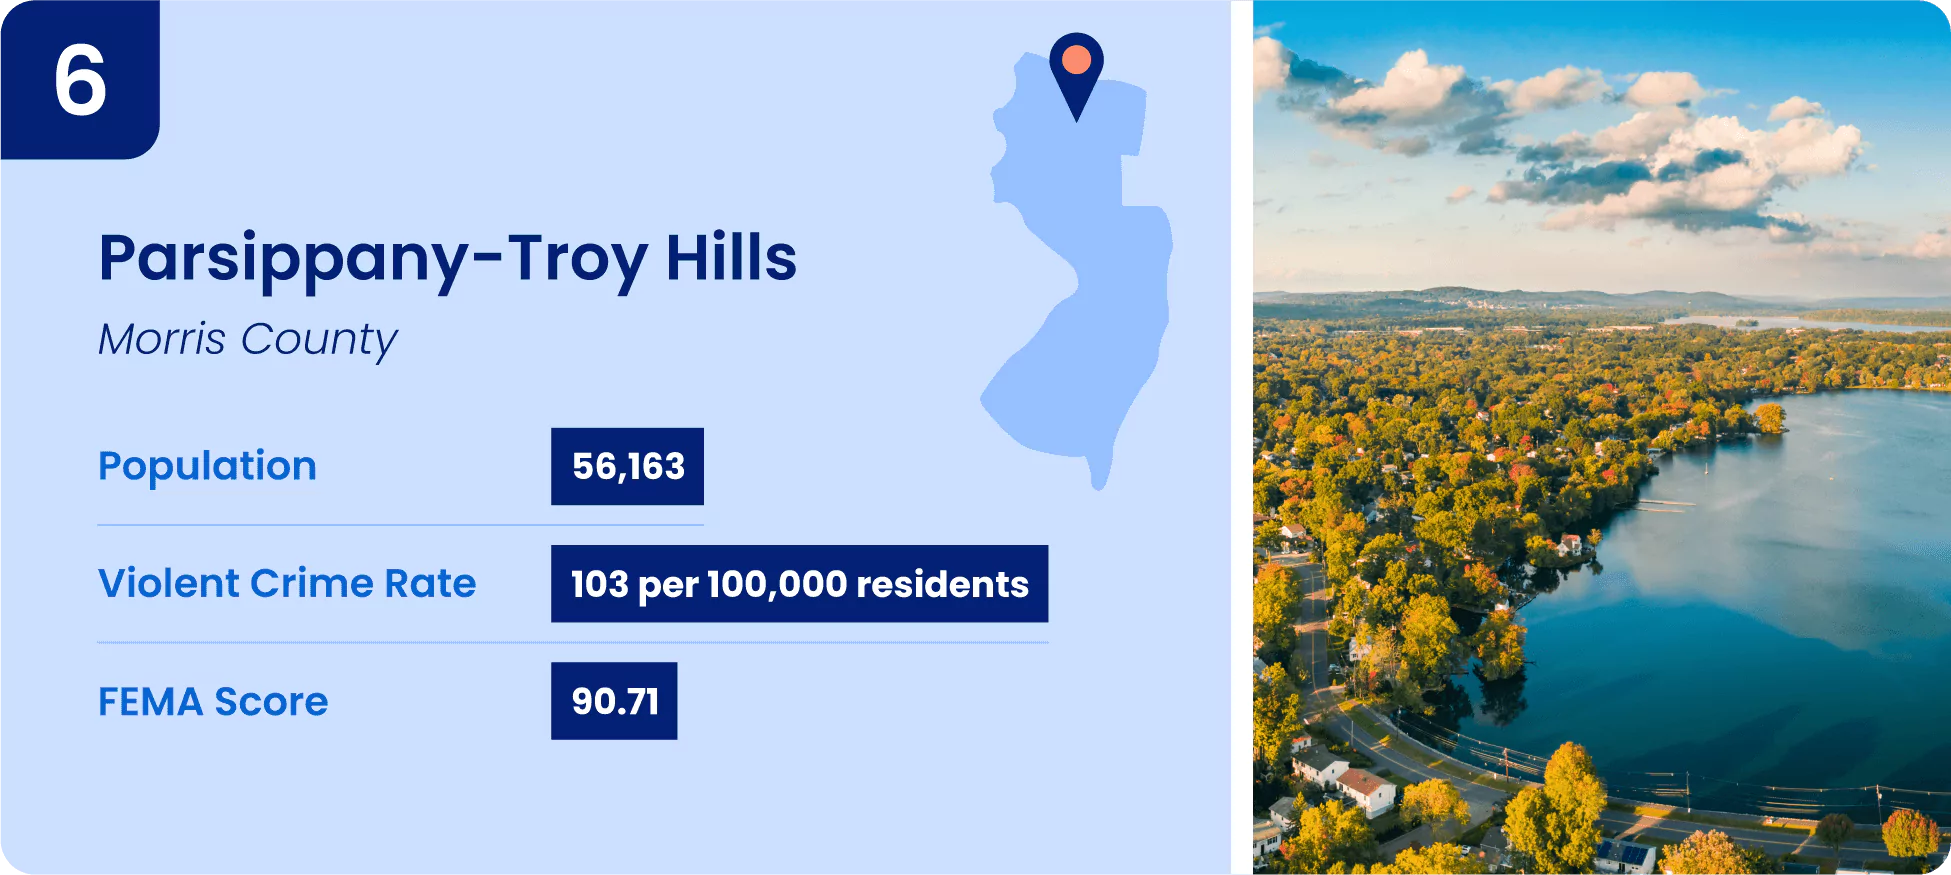 Image shows key information for one of the safest cities in New Jersey, Parsippany-Troy Hills Township.